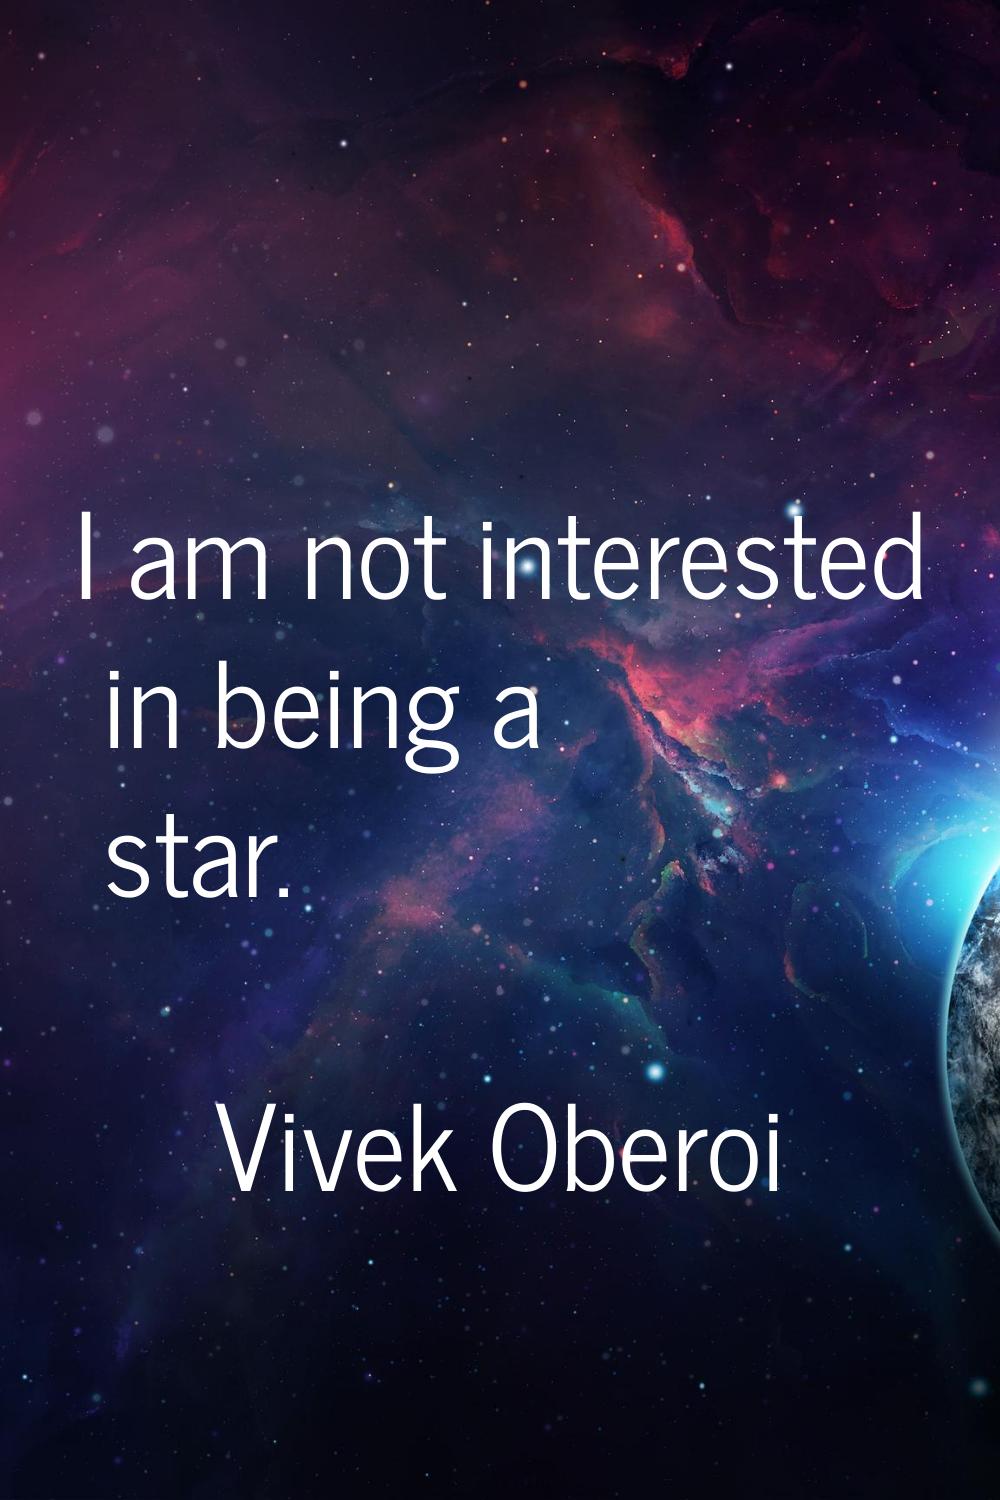 I am not interested in being a star.